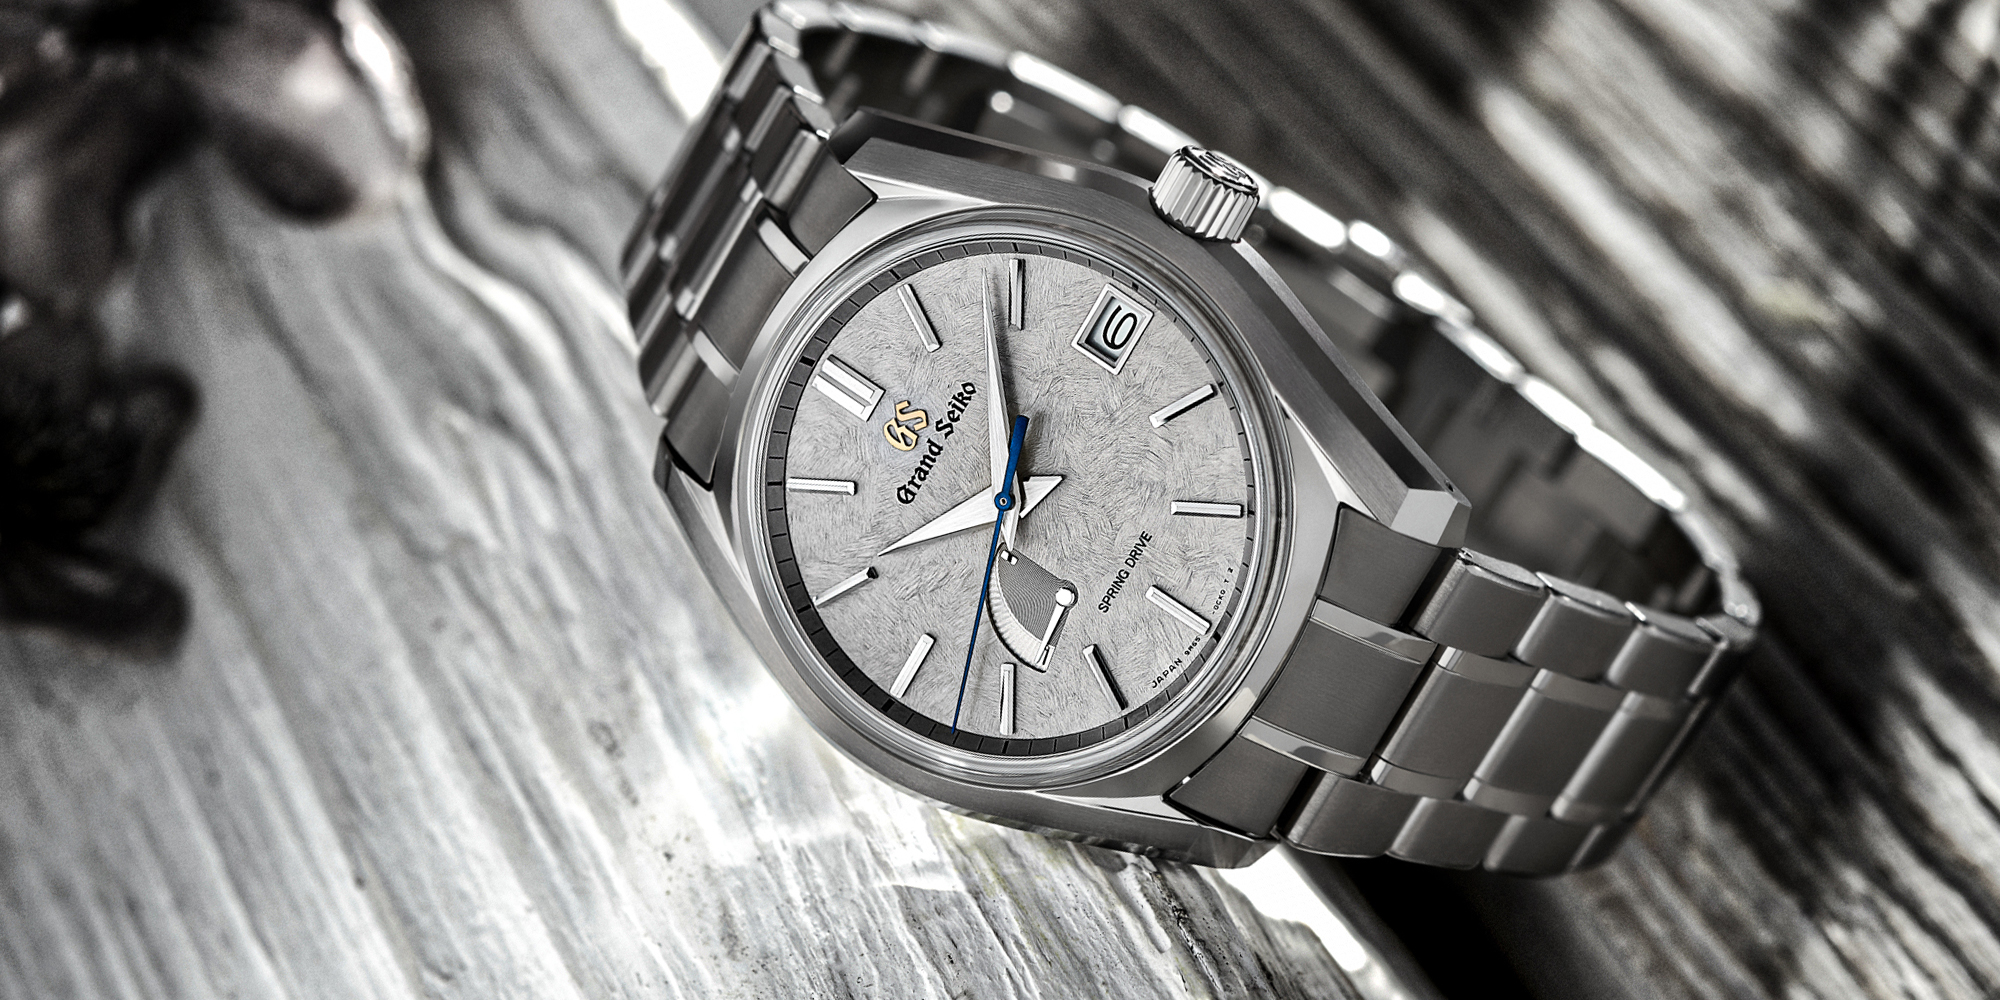 Grand Seiko Pays Tribute to the Nature of Time and Japan's Twenty-Four  Seasons - GS9 Club | Grand Seiko : GS9 Club | Grand Seiko